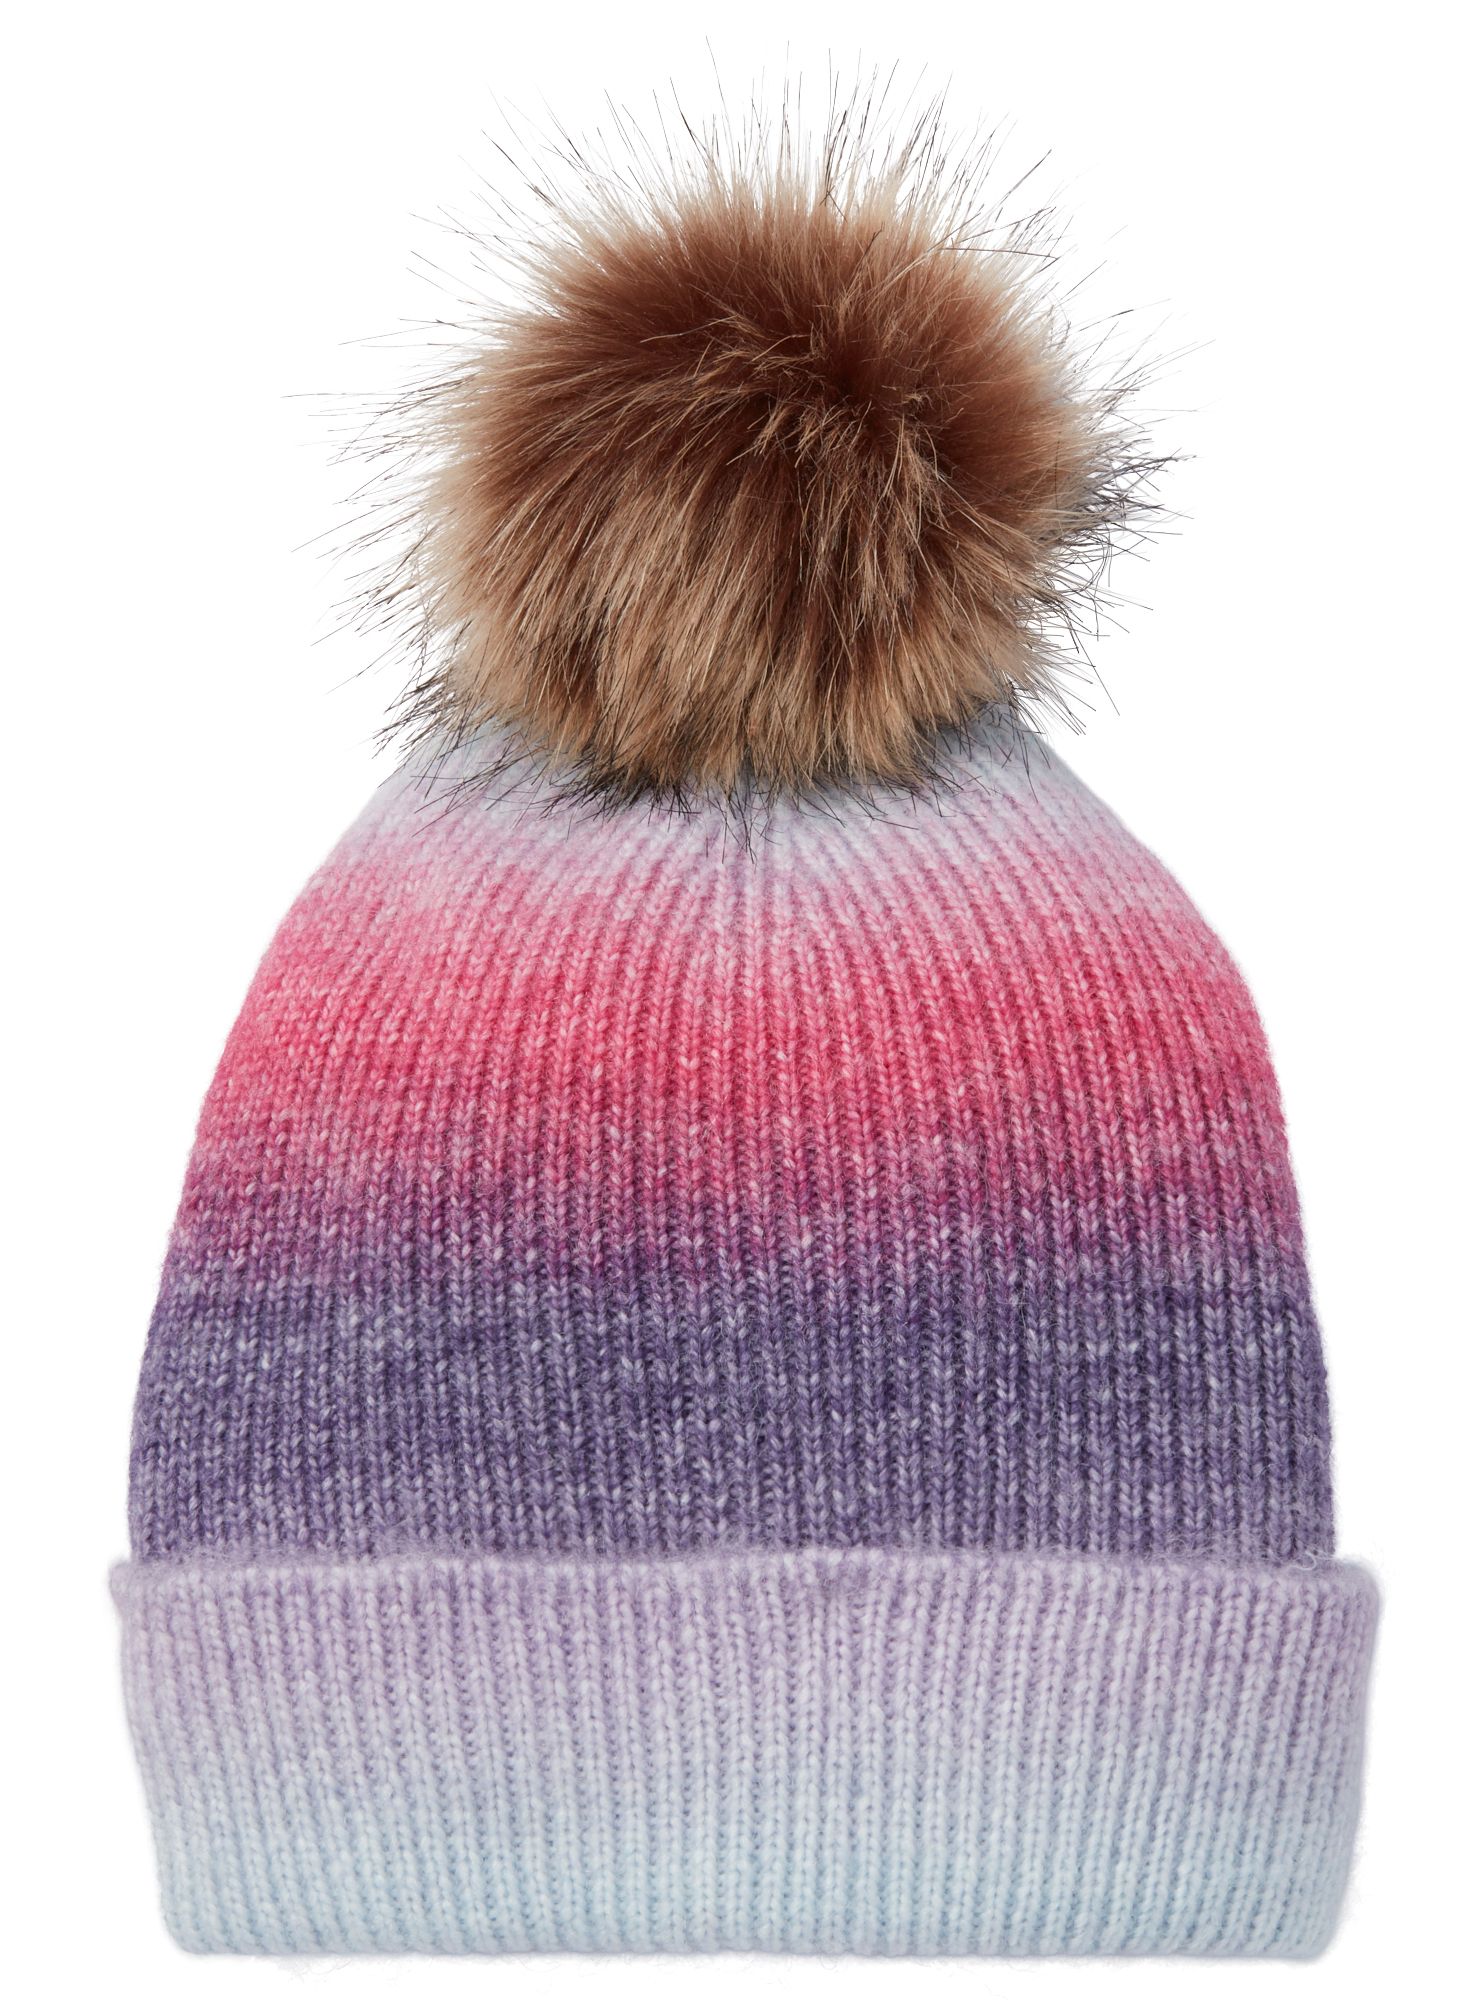 NORTHEAST OUTFITTERS YOUTH COZY CABIN OVER THE RAINBOW BEANIE INTERNATIONAL SHIPPING